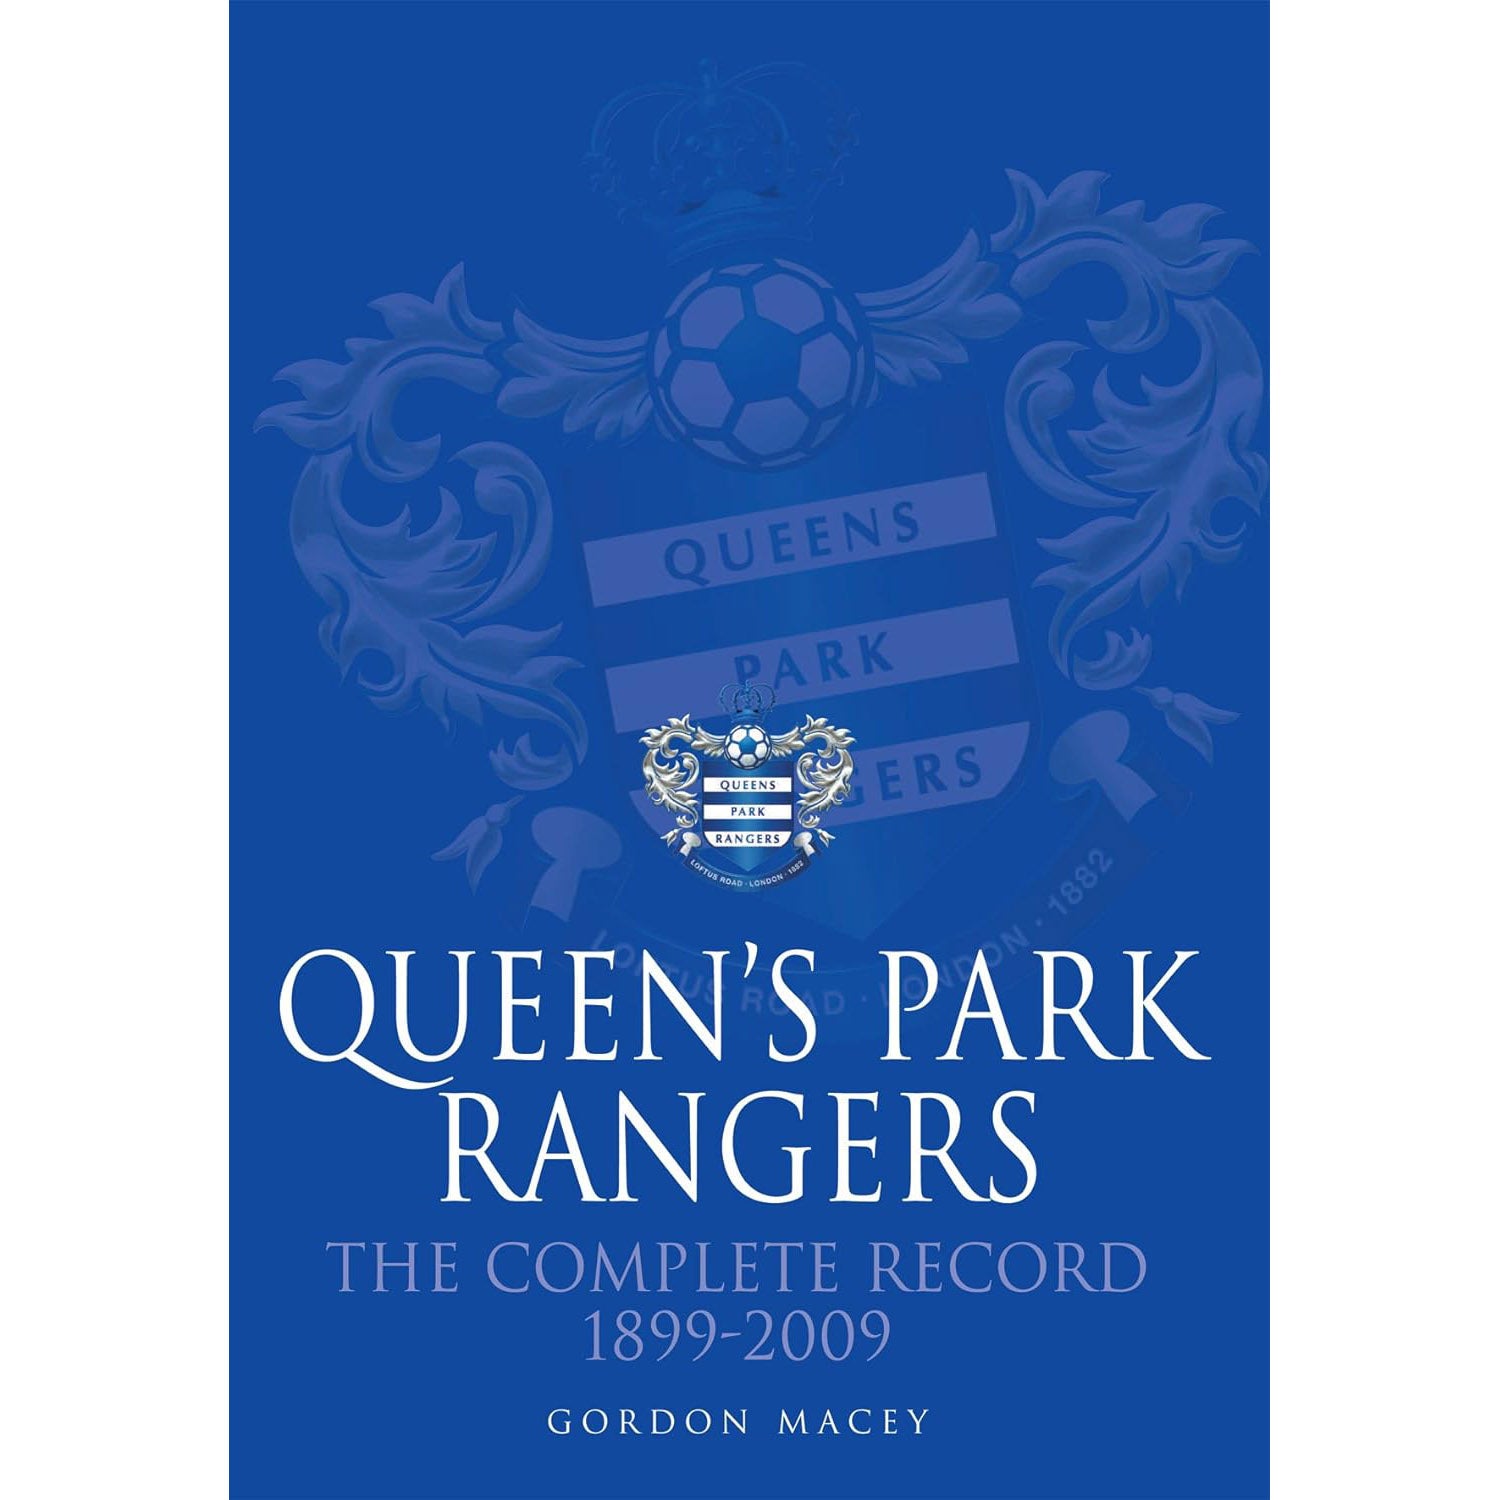 Queen's Park Rangers – The Complete Record 1899-2009